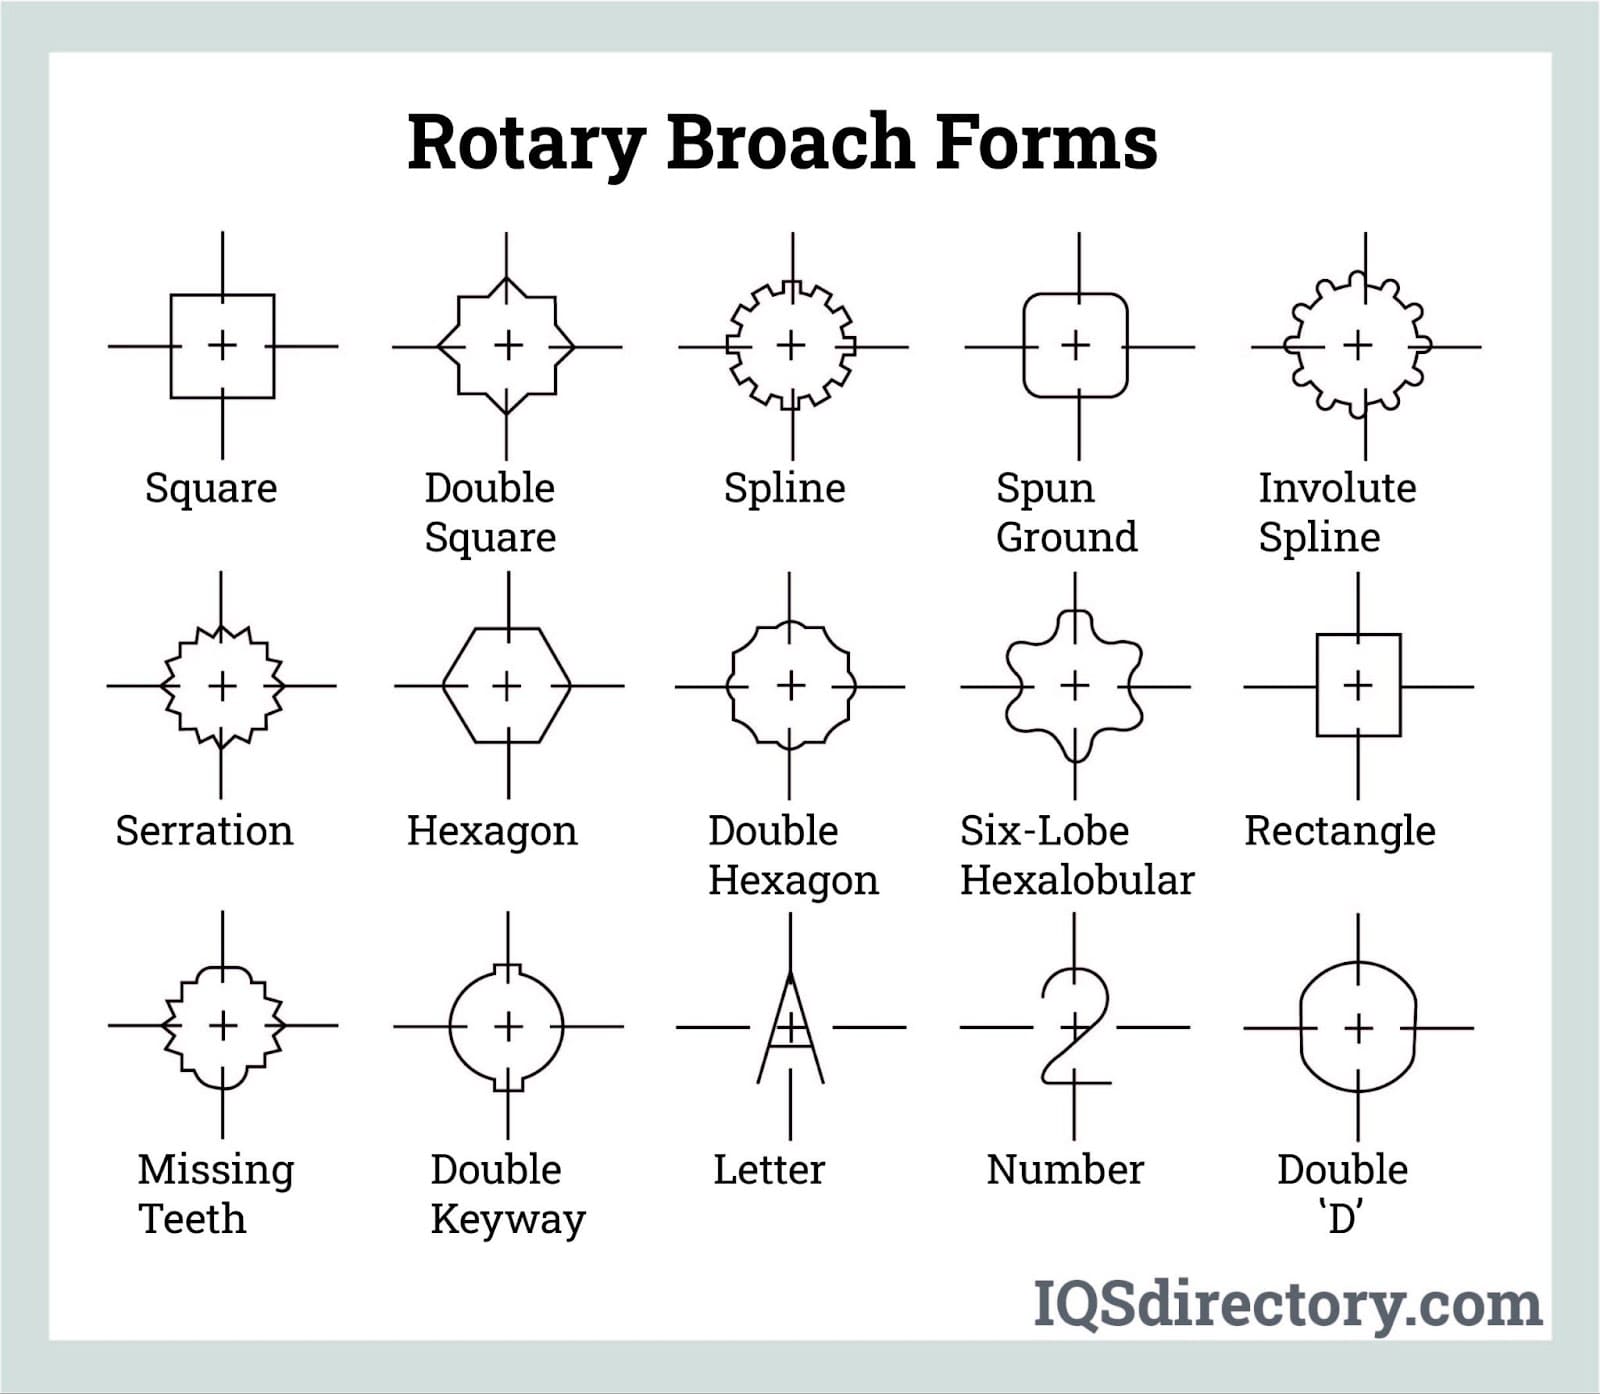 Rotary Broach Forms